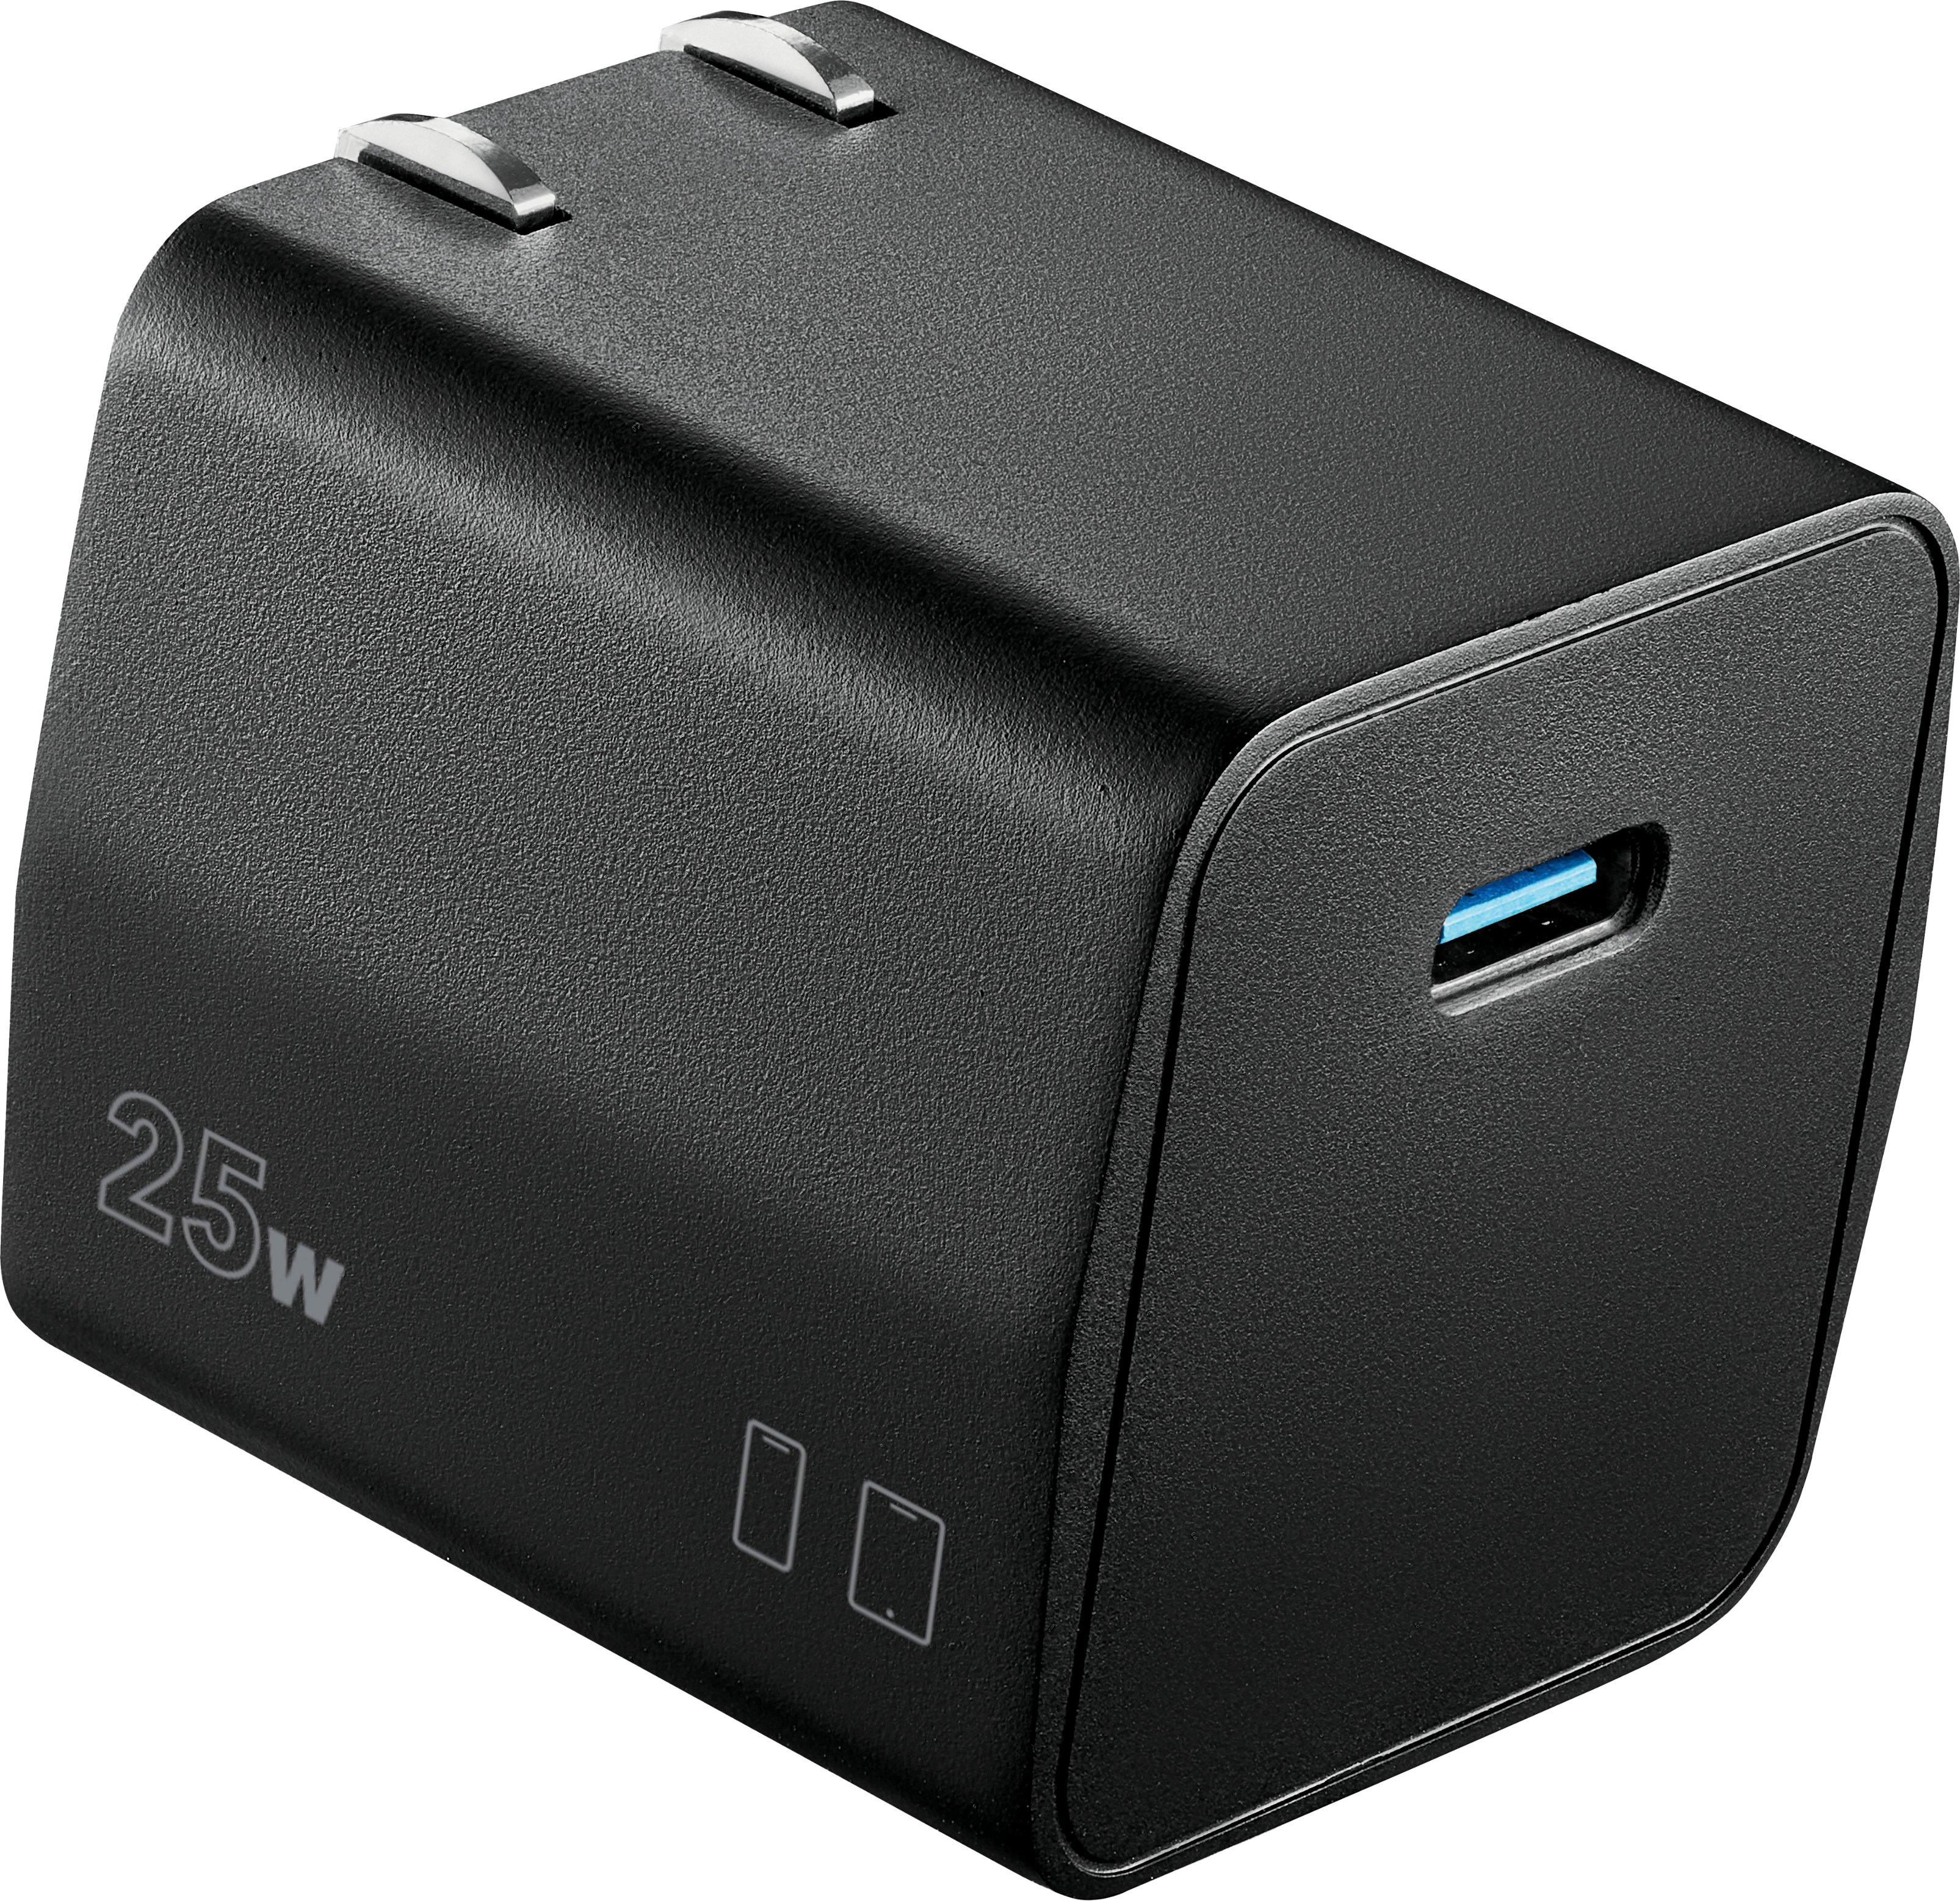 Anker 312 Charger (Ace, 25W)